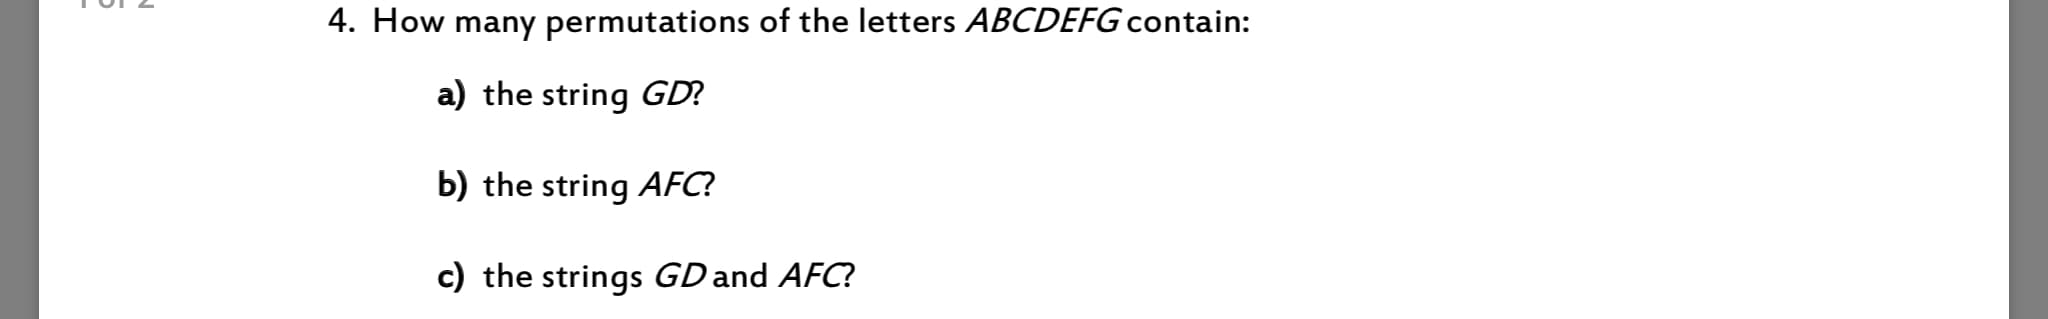 4. How many permutations of the letters ABCDEFG contain:
a) the string GD?
b) the string AFC?
c) the strings GD and AFC?
